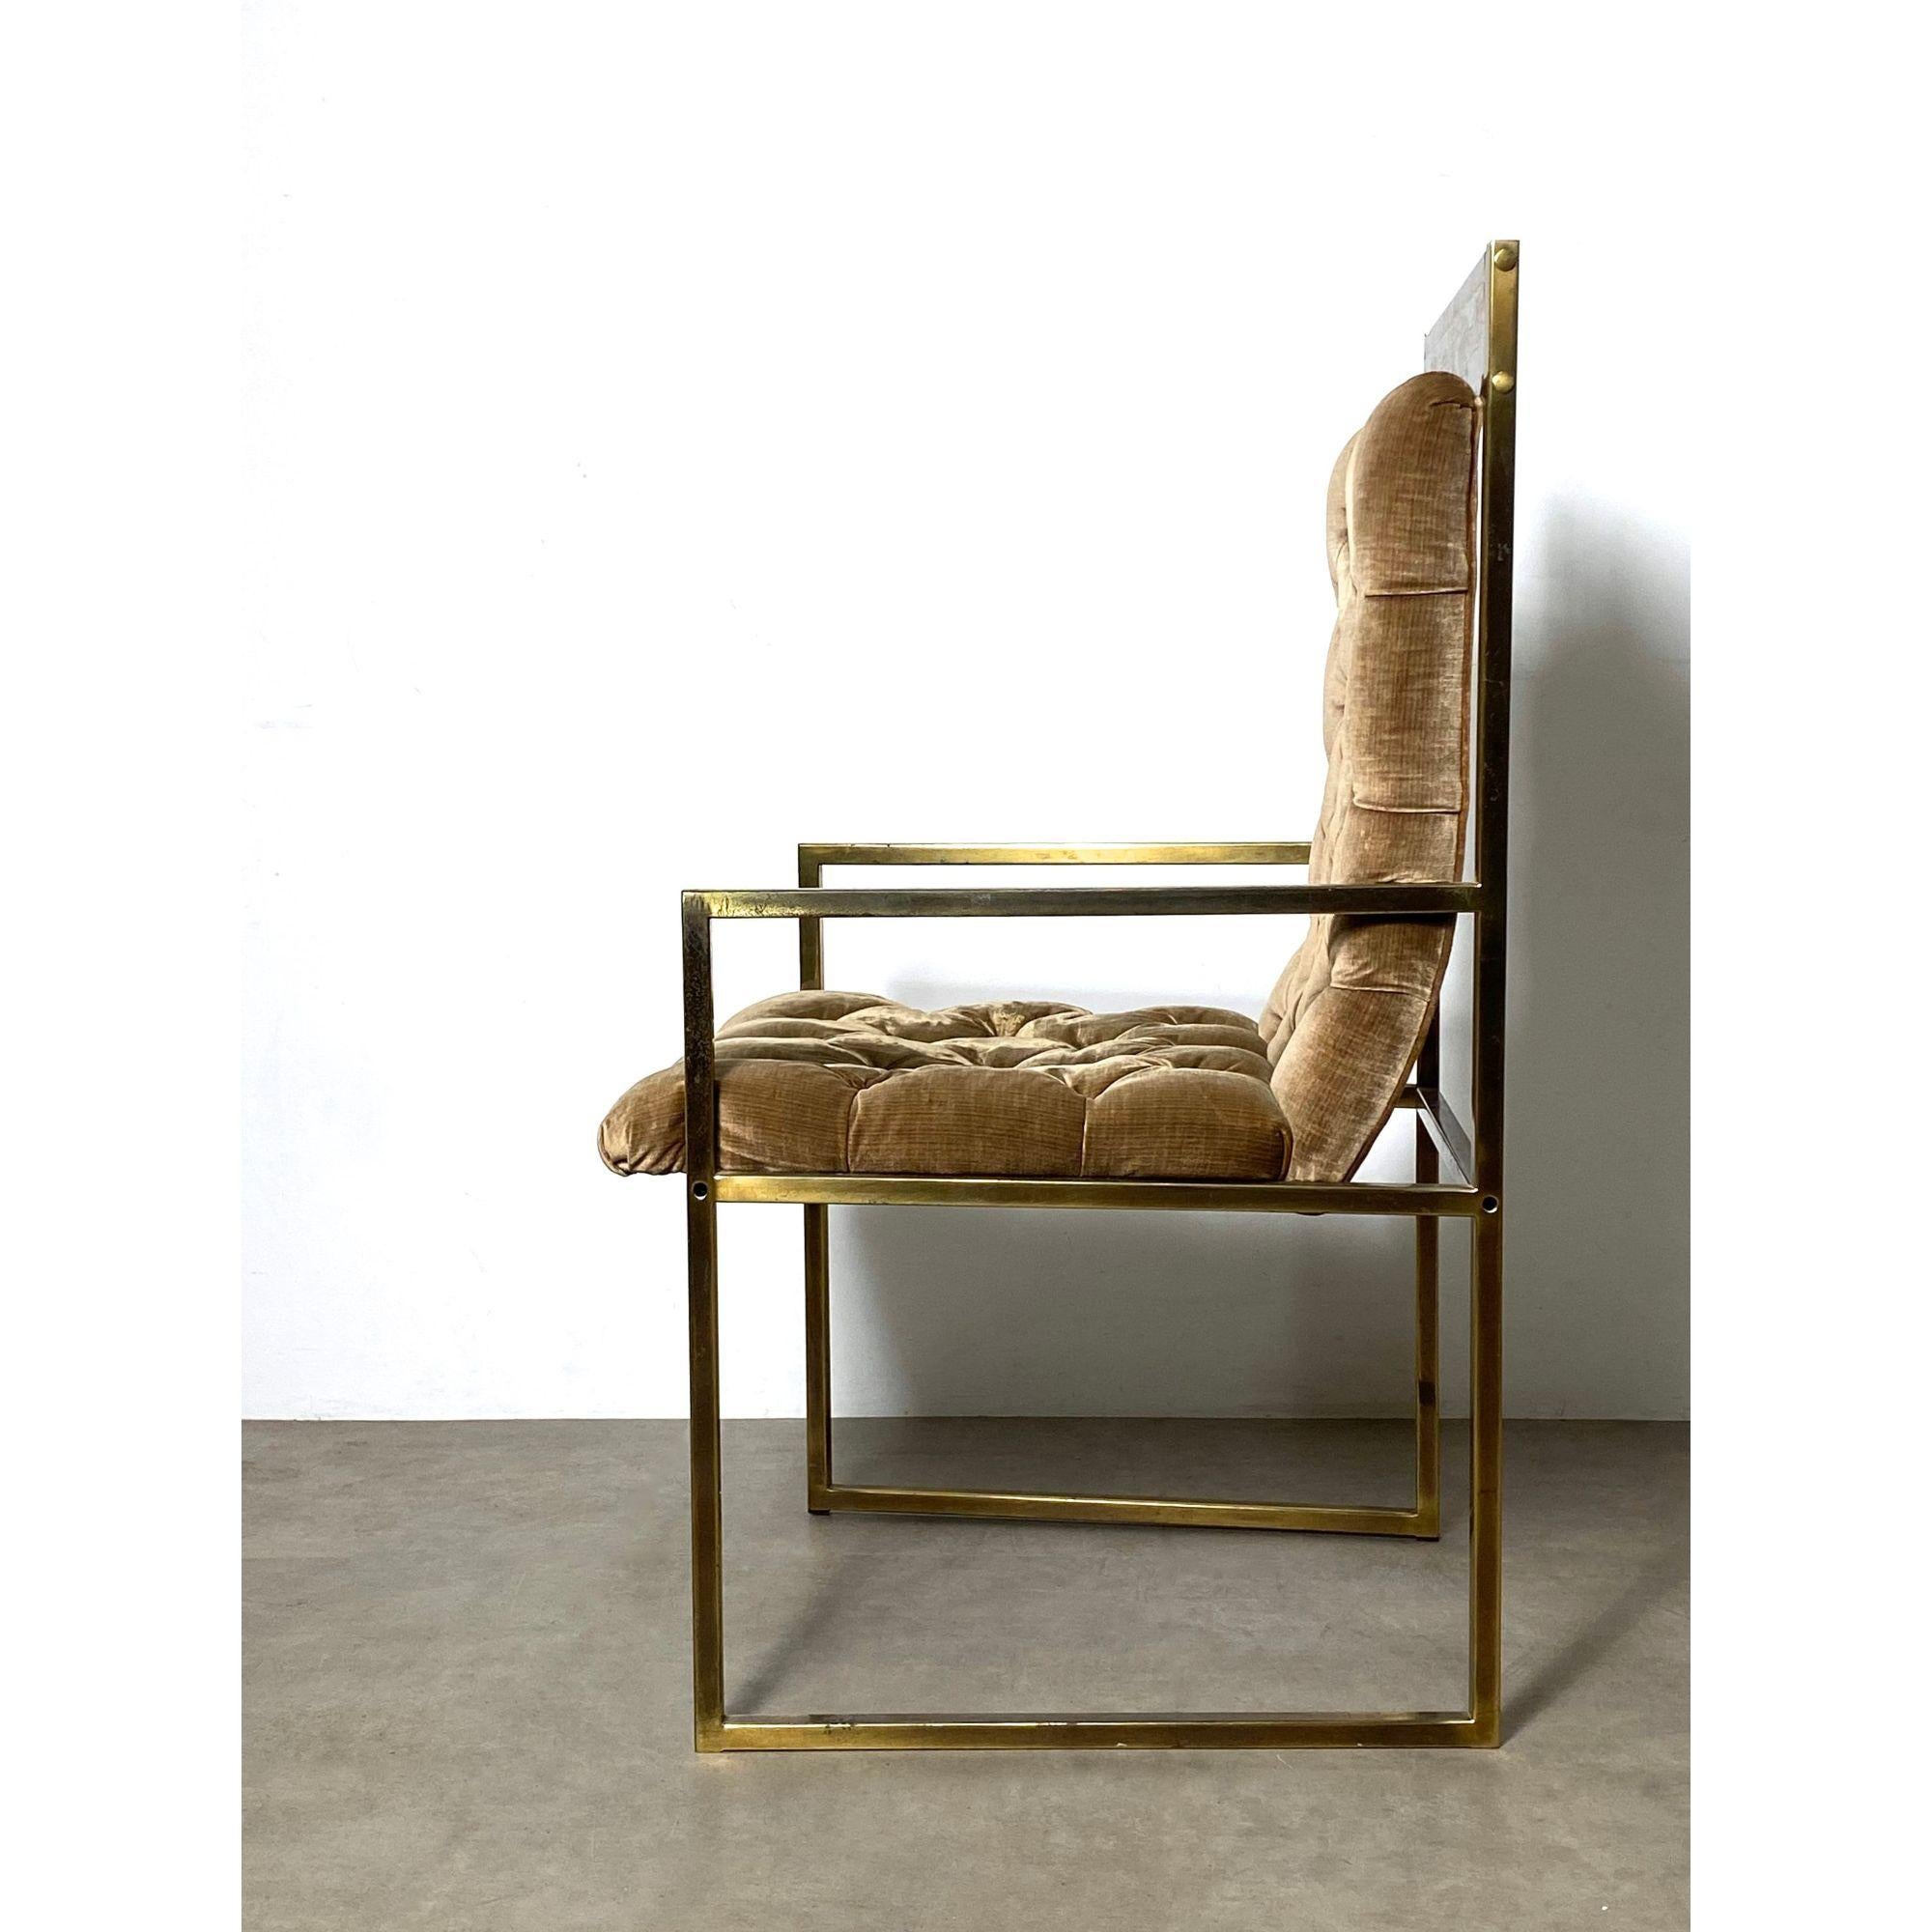 Mastercraft Acid Etched Armchair in Brass by Bernhard Rohne, circa 1970's In Good Condition For Sale In Troy, MI